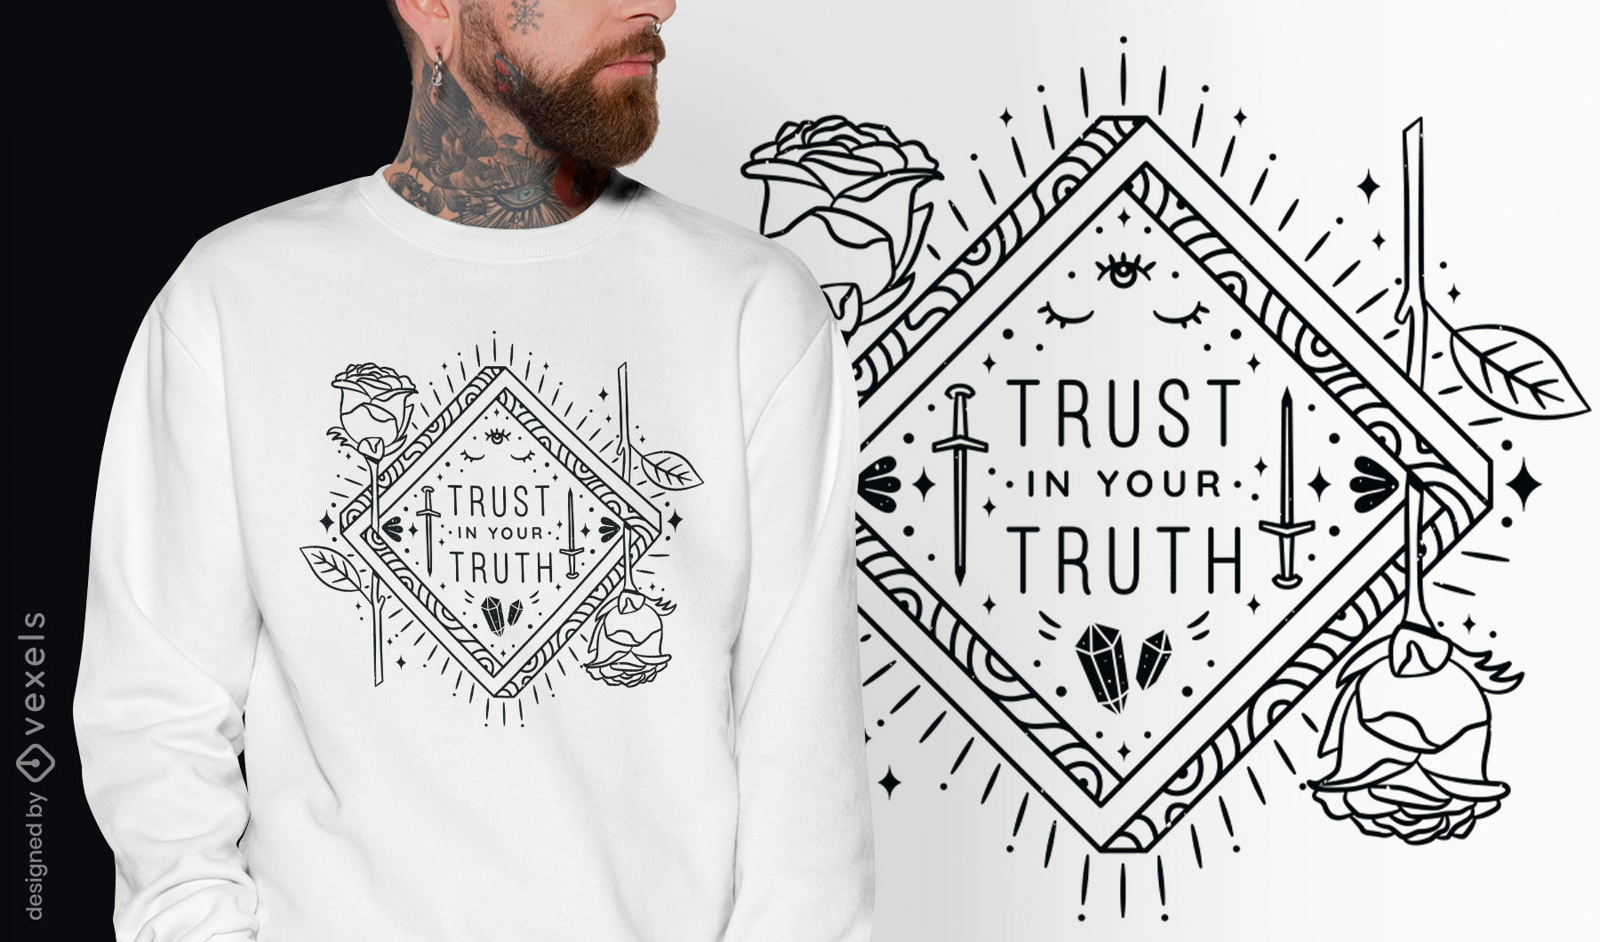 Trust in your truth t-shirt design